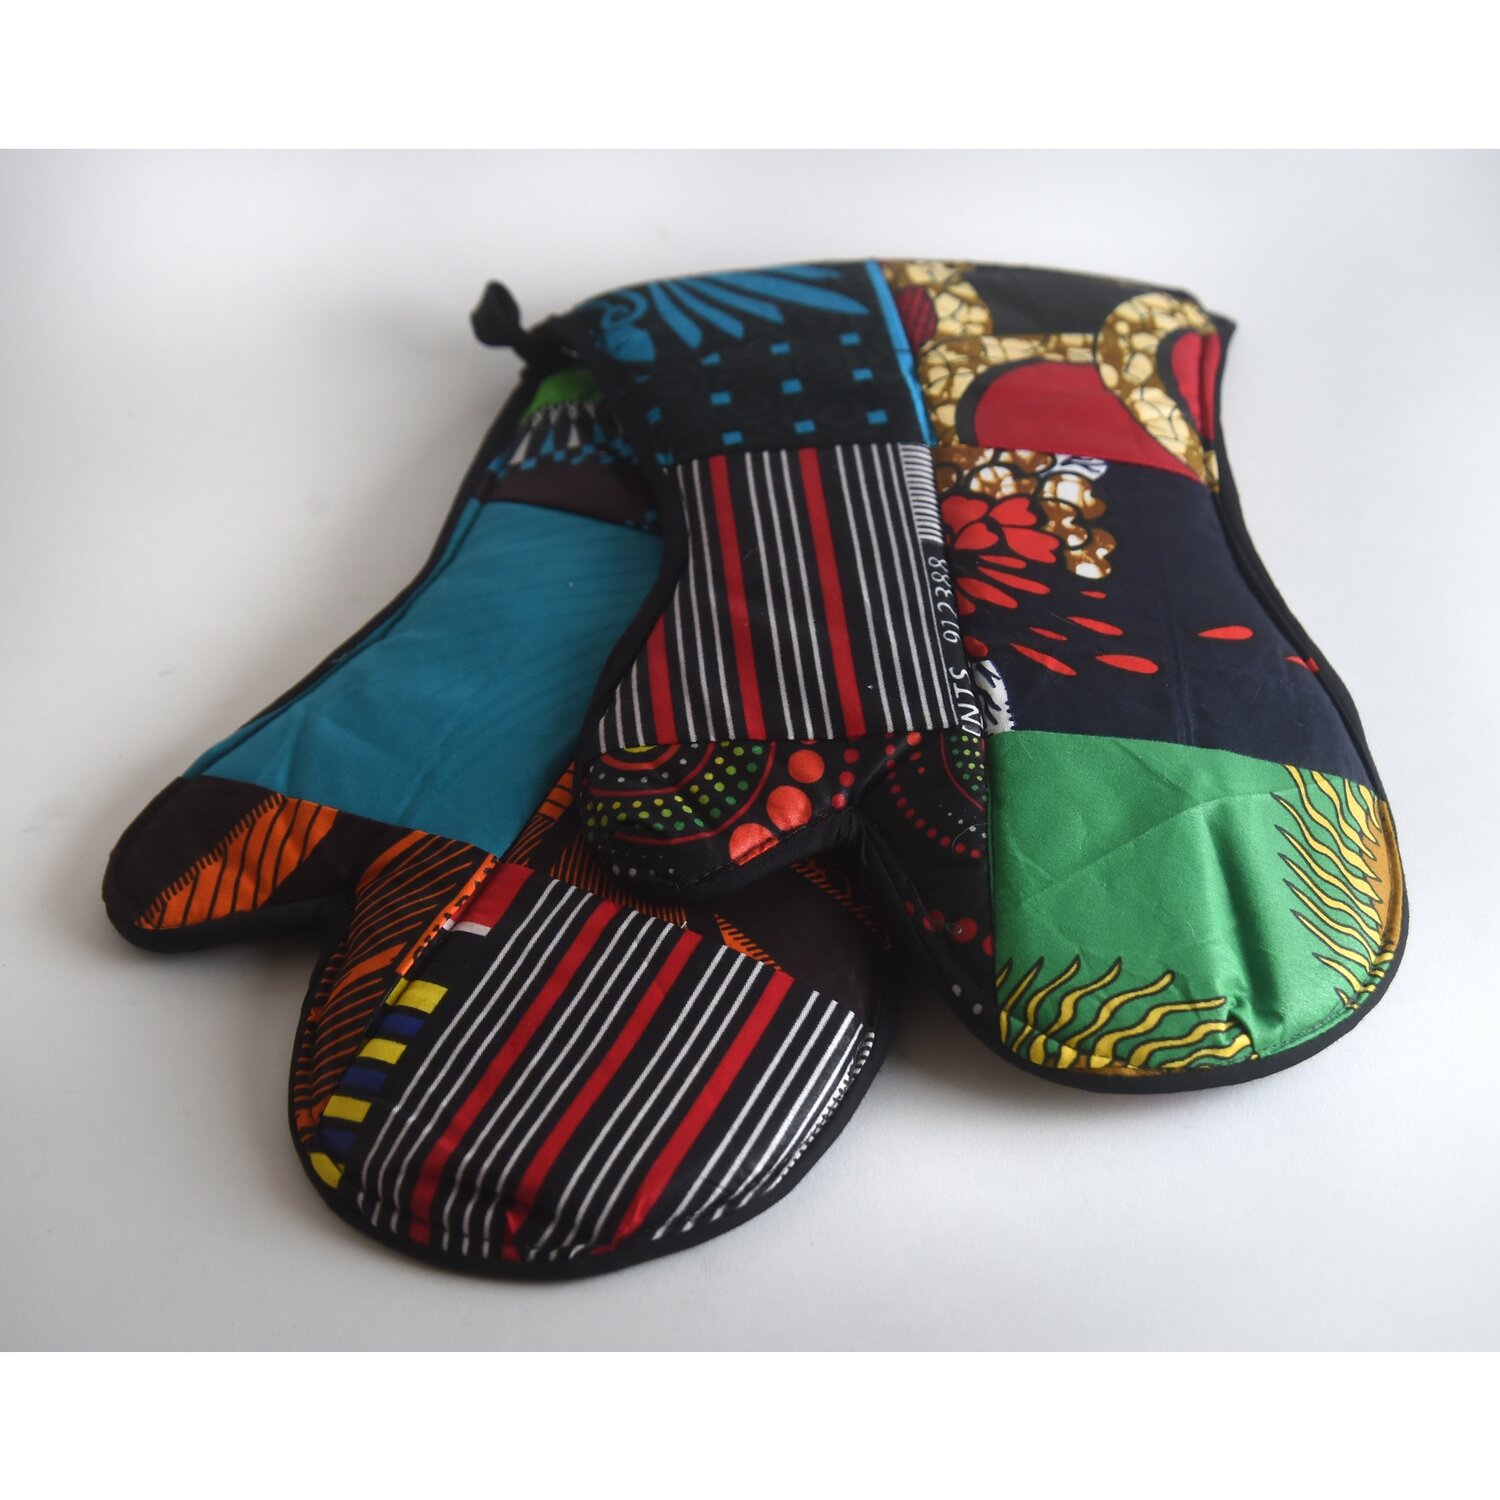 The Oven Mitts Set of 2